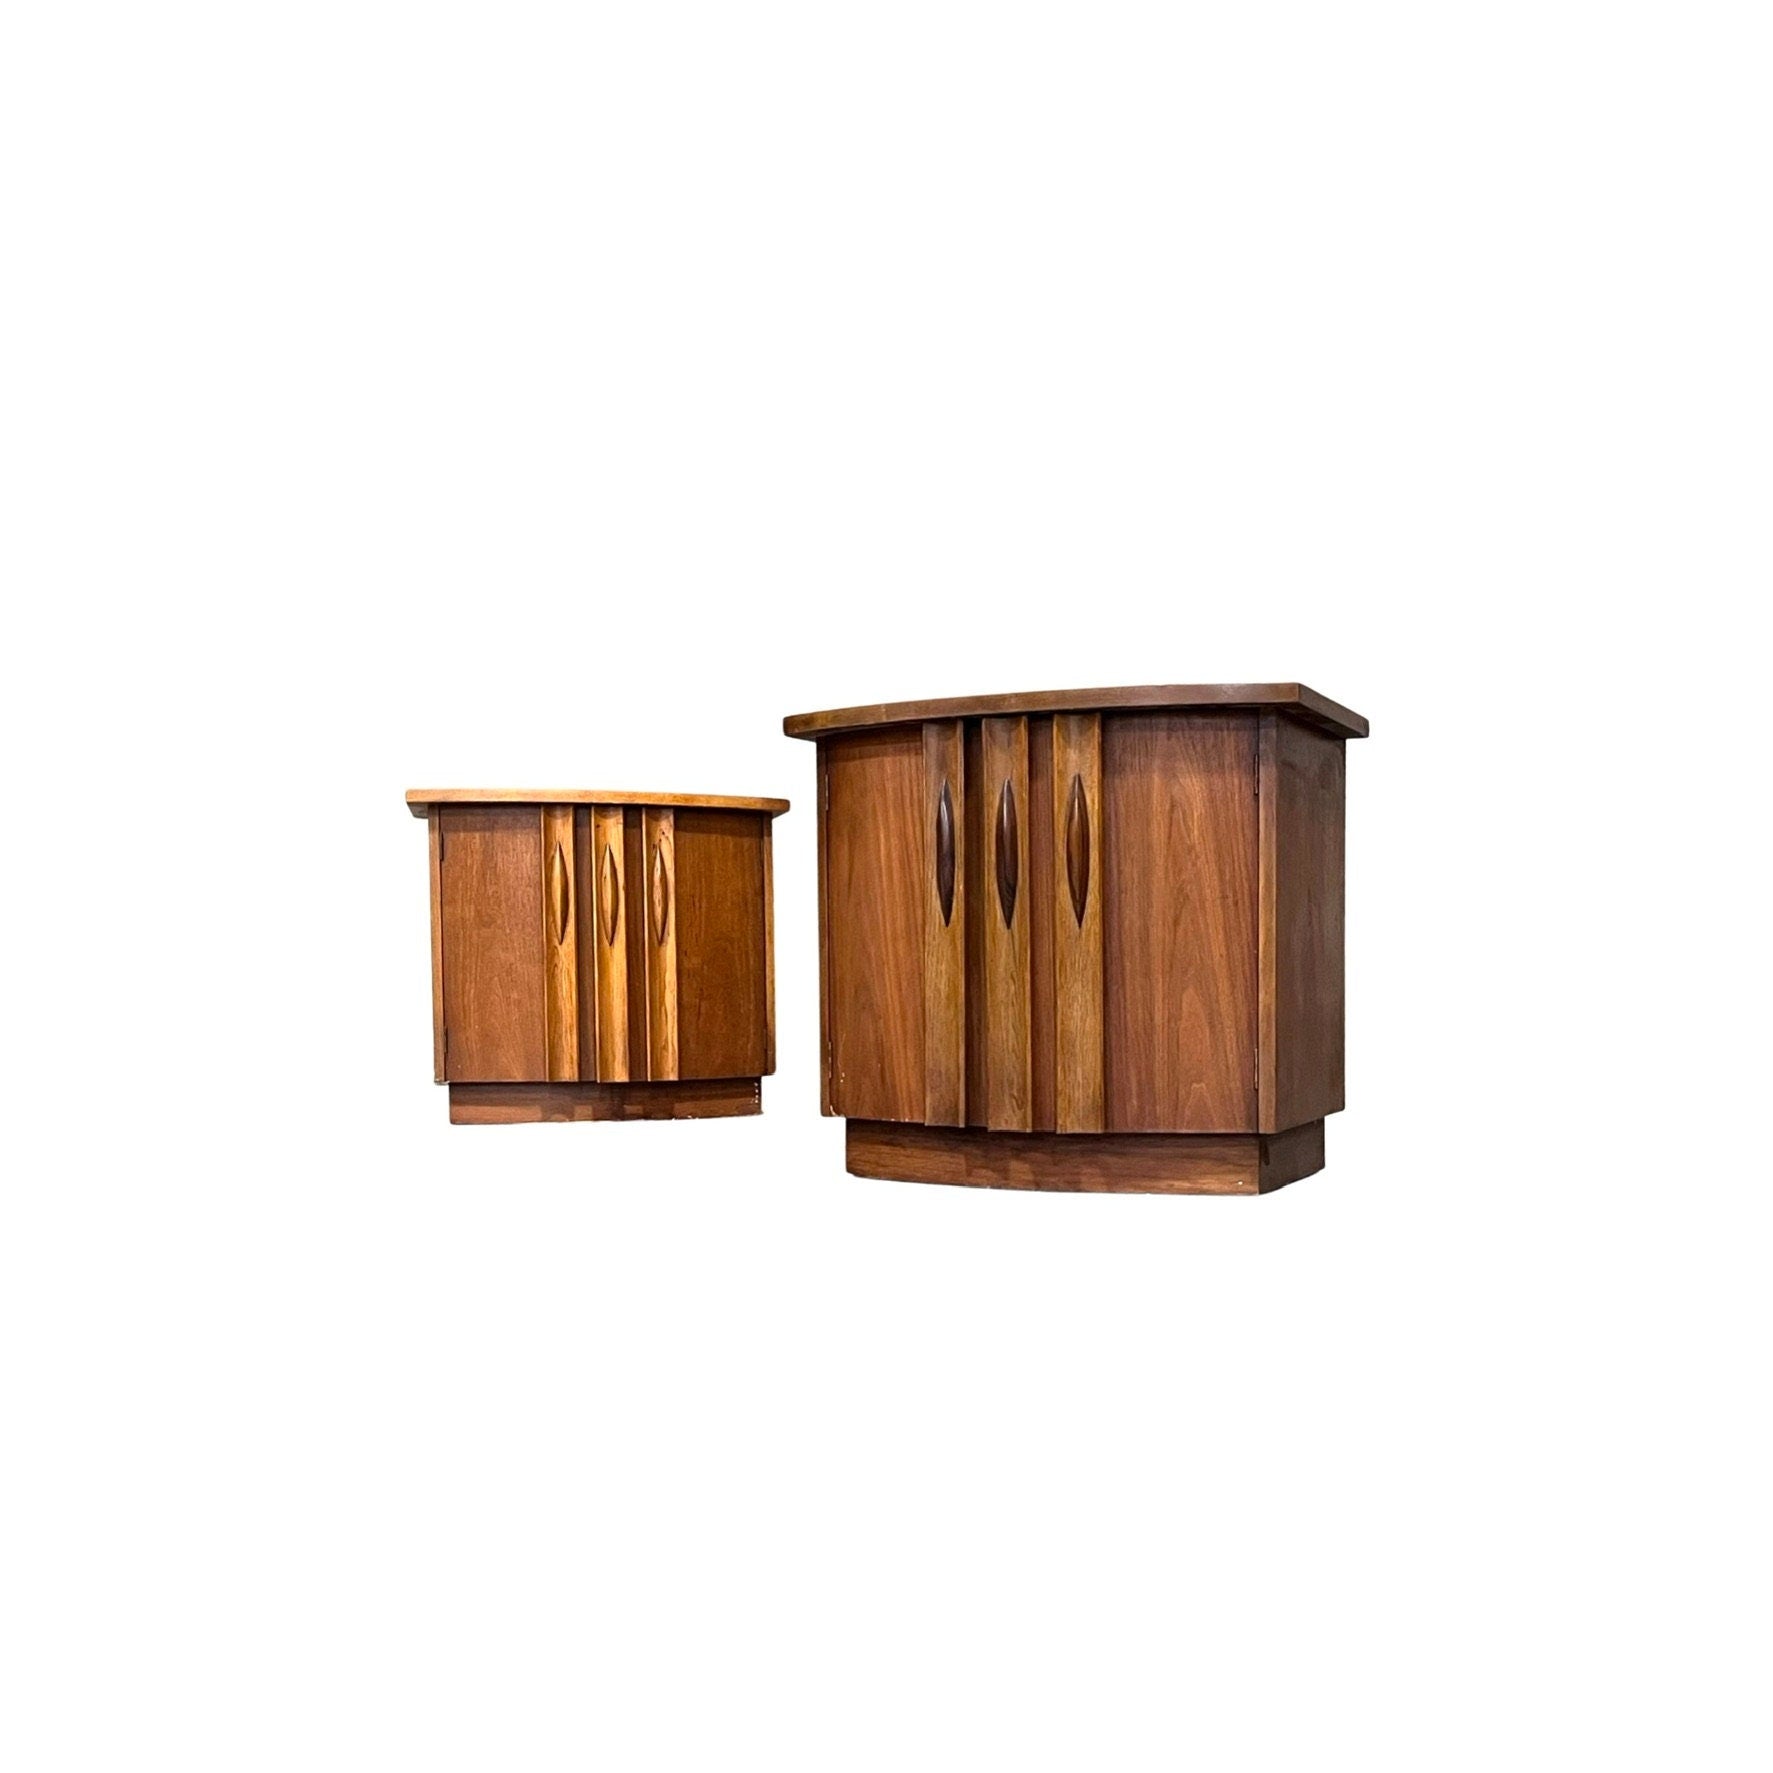 Elegant pair of vintage nightstands by Thomasville, showcasing ribbed design and solid walnut accents